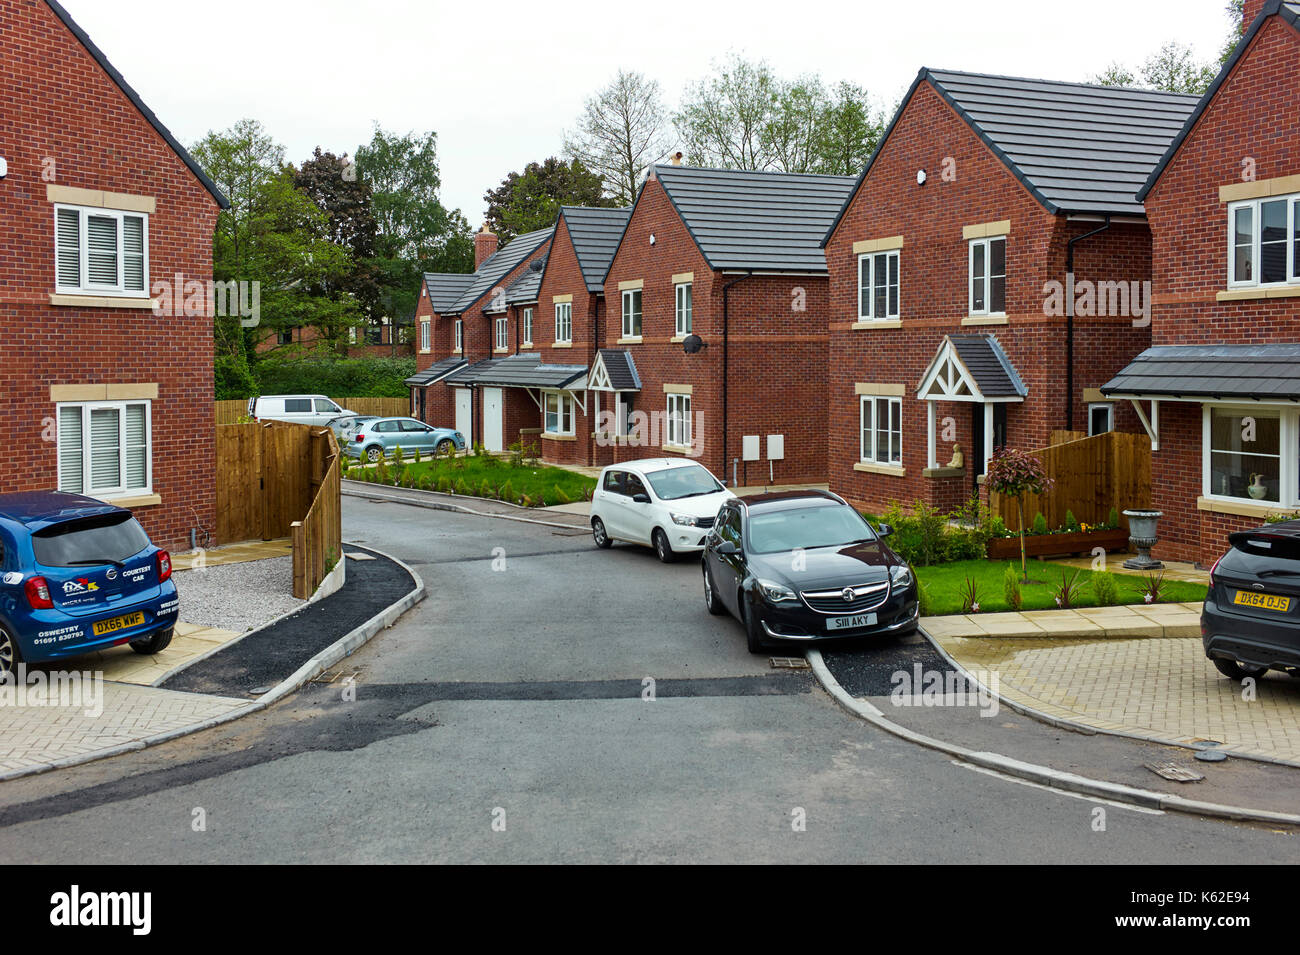 New housing estate with cars parked Stock Photo